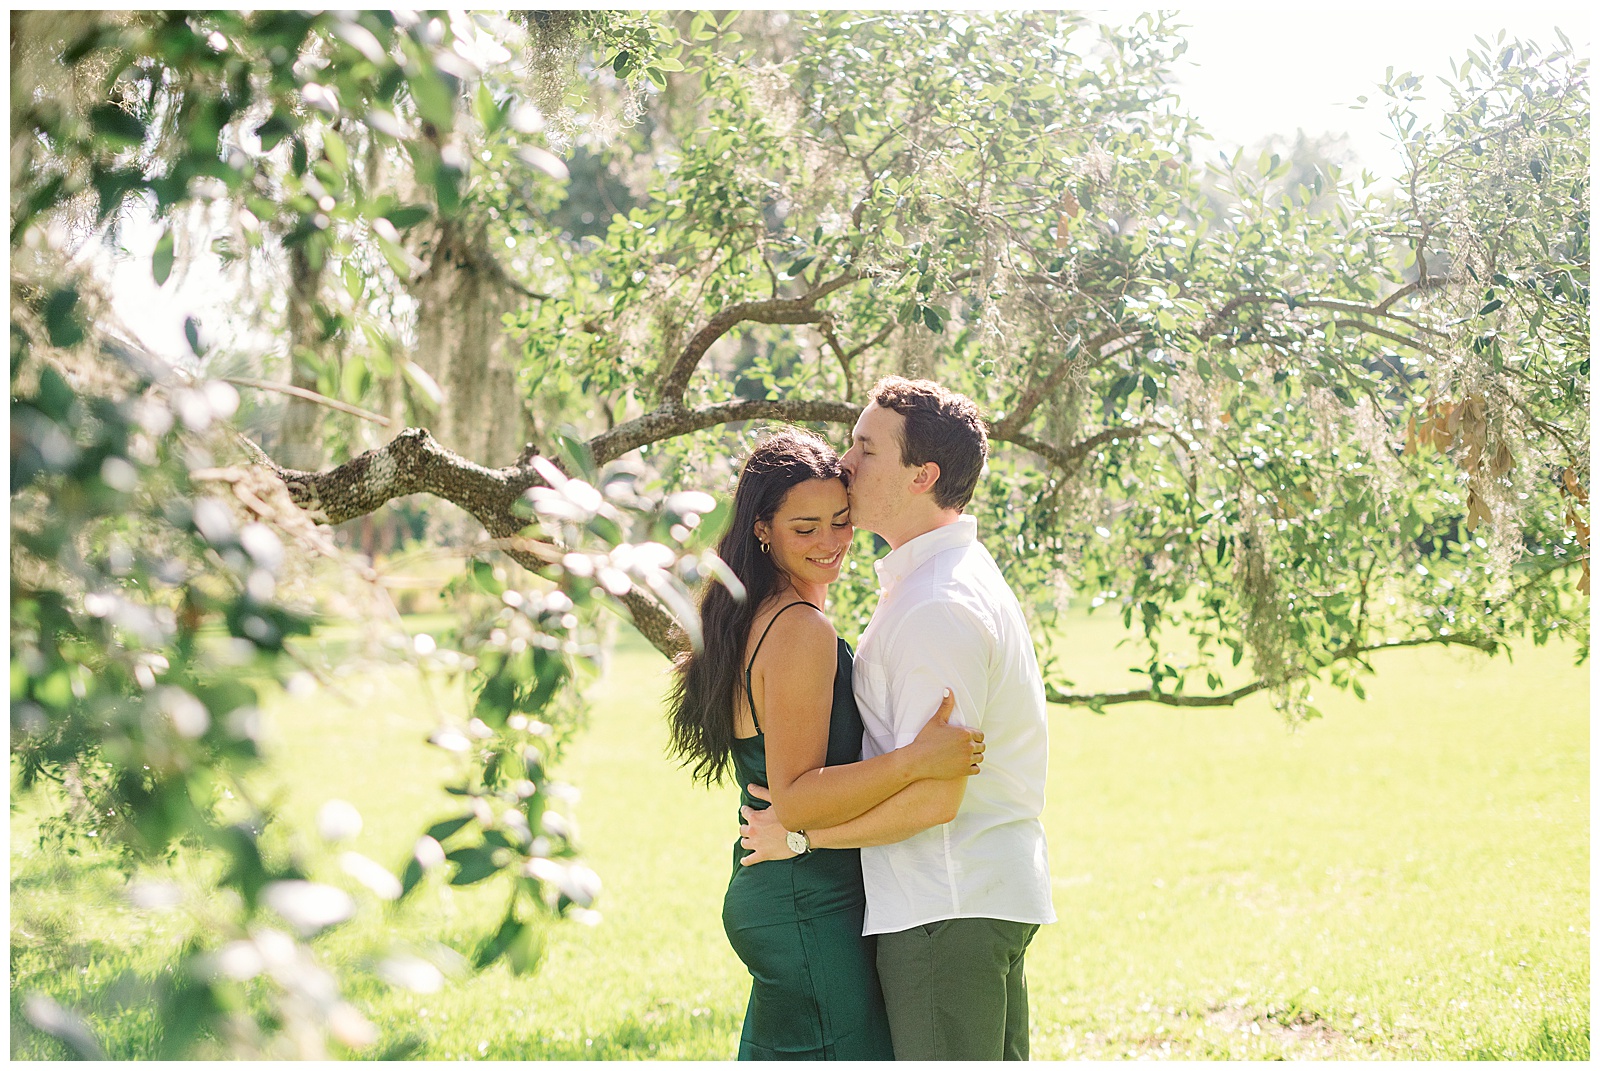 Bok Tower Garden, Bok Tower, Bok Tower Garden Engagement Session, Bok Tower Engagement Photos